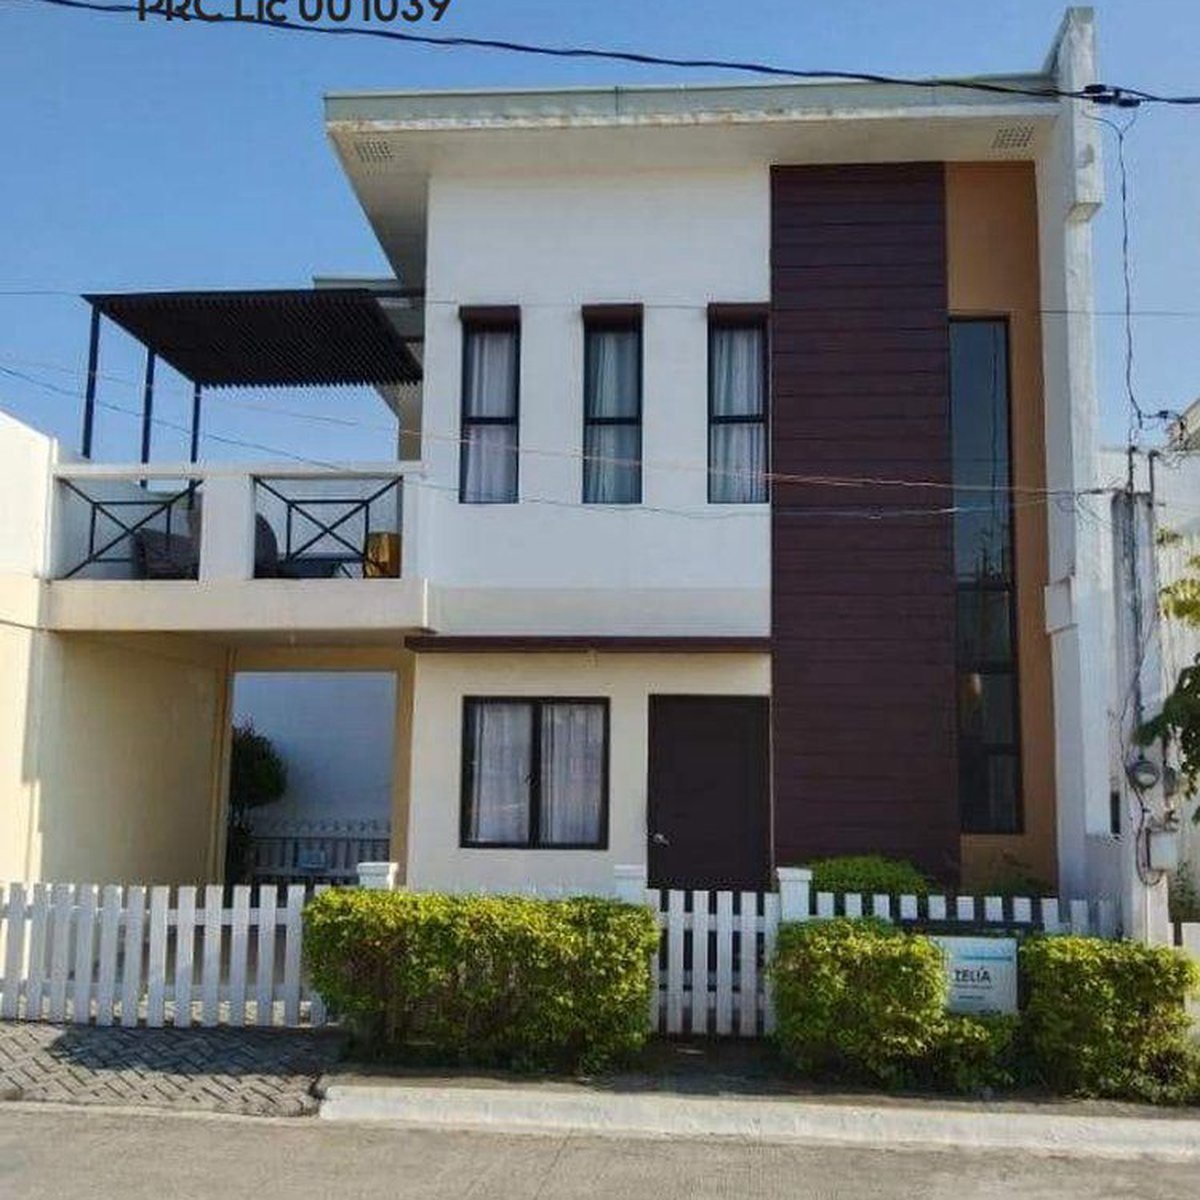 Pre-selling 2-bedroom Single Attached House For Sale thru Pag-IBIG